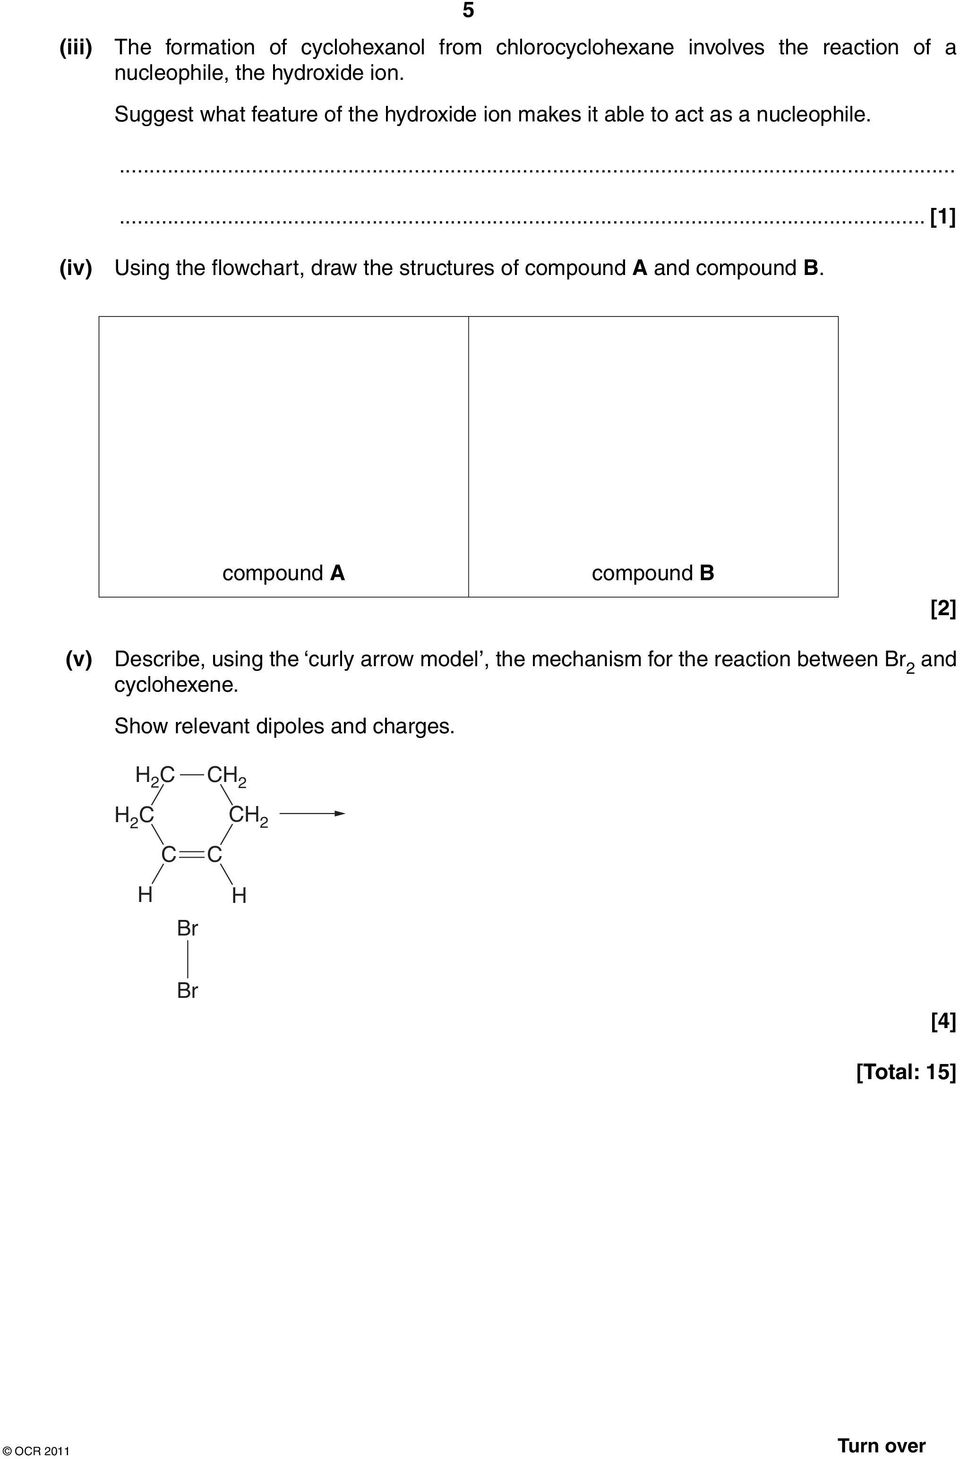 ... [1] (iv) Using the flowchart, draw the structures of compound A and compound B.